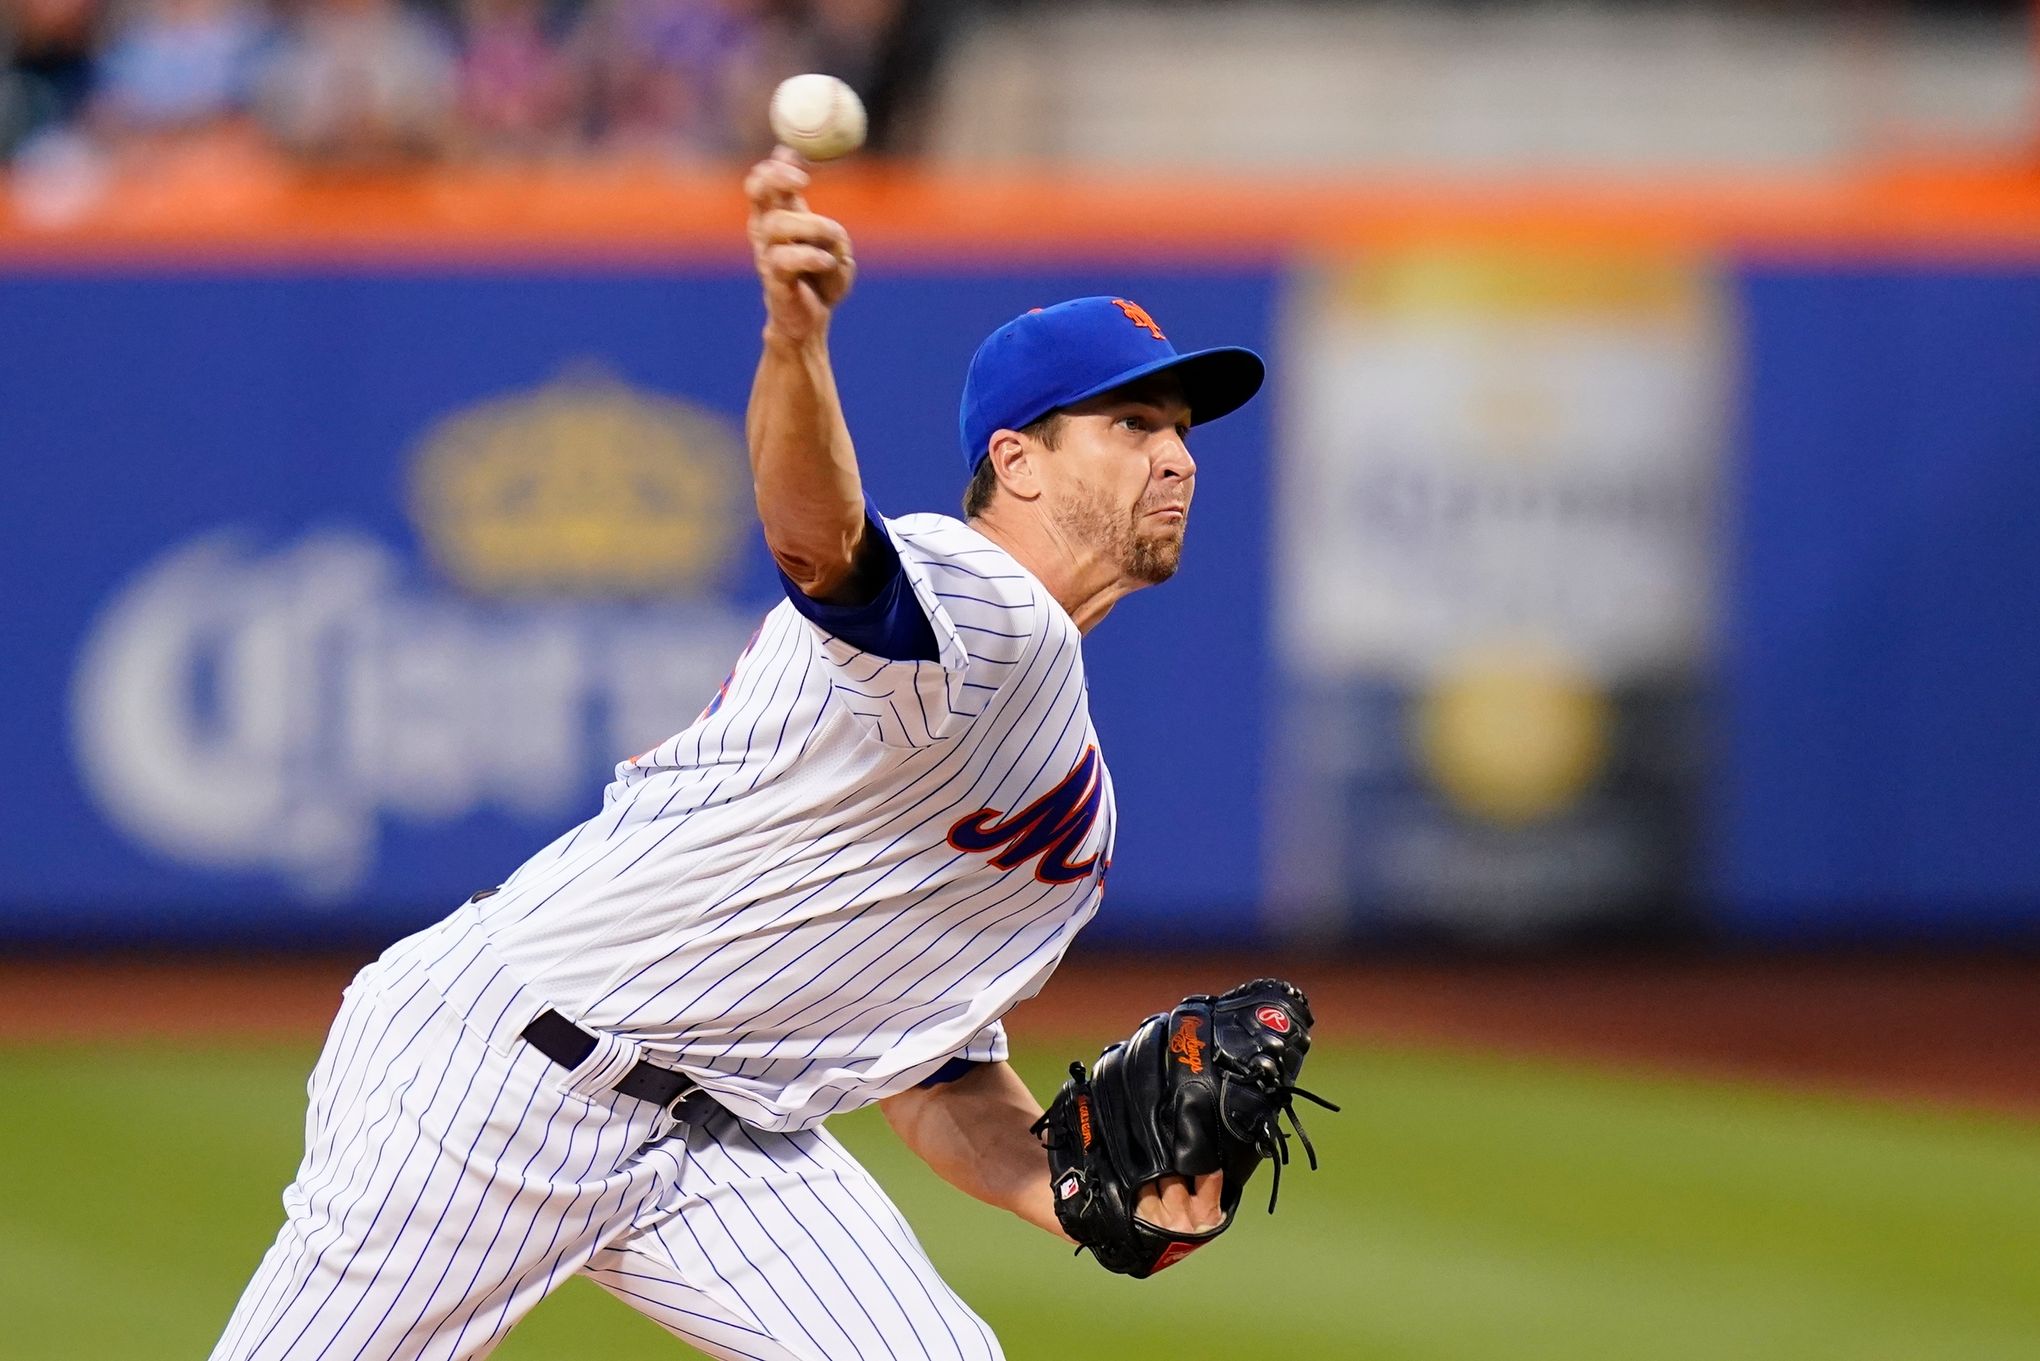 Jacob deGrom is back, follow his journey from 2021 to his return